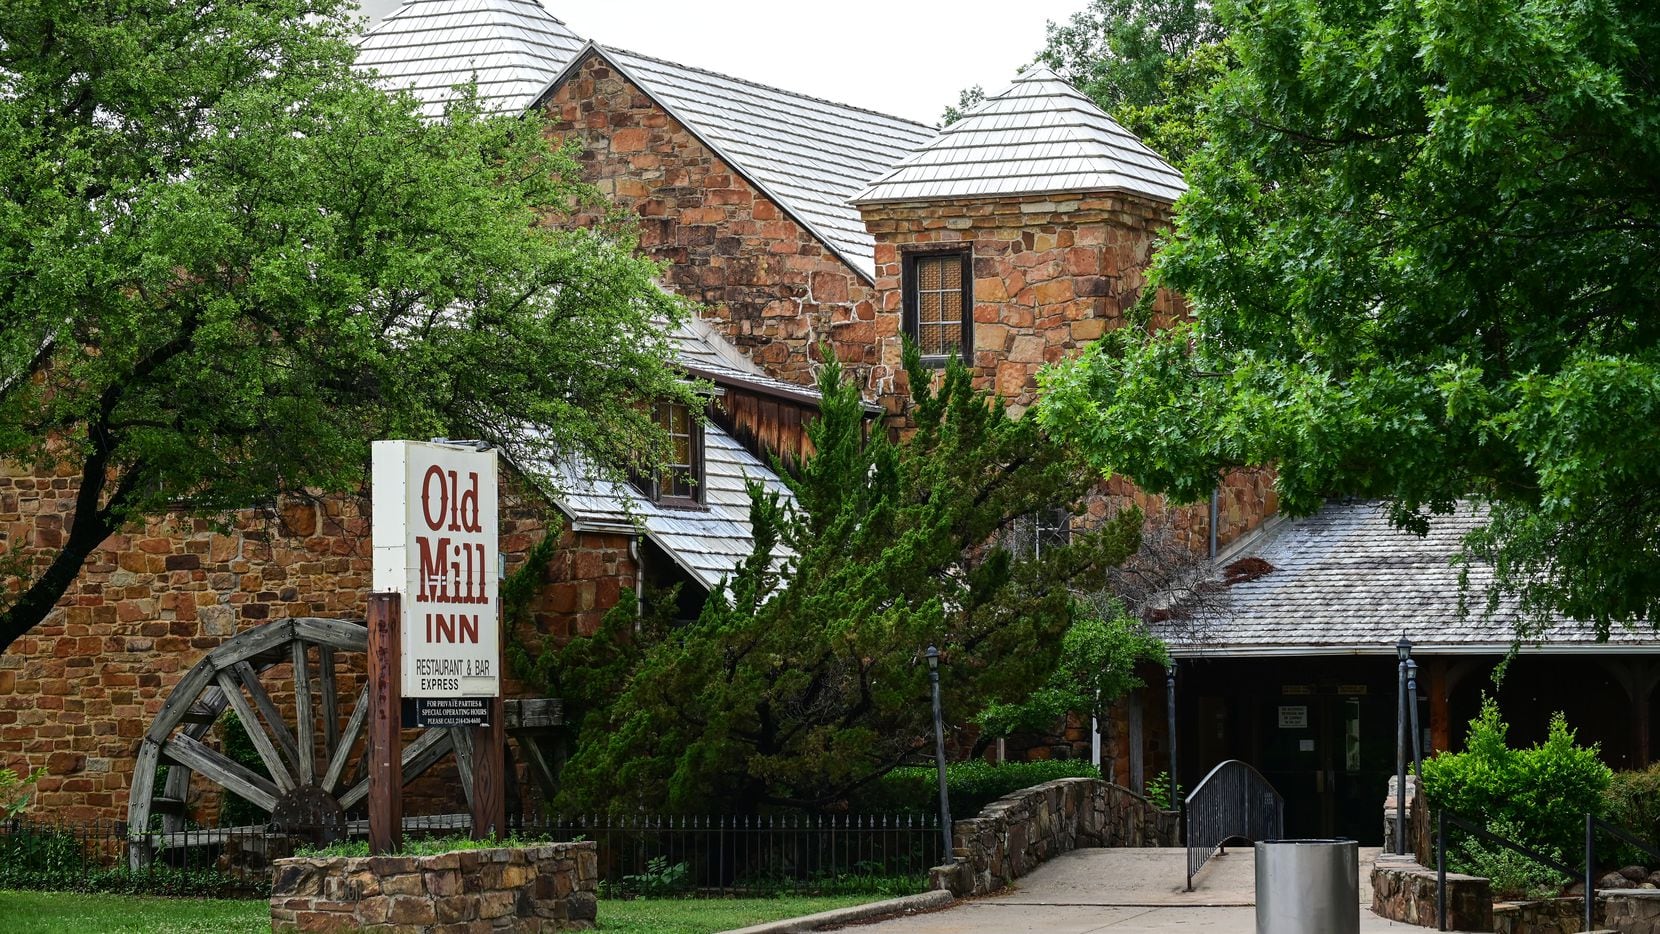 Fair Park's stone restaurant with a waterwheel has been open since 1936. The Old Mill Inn...